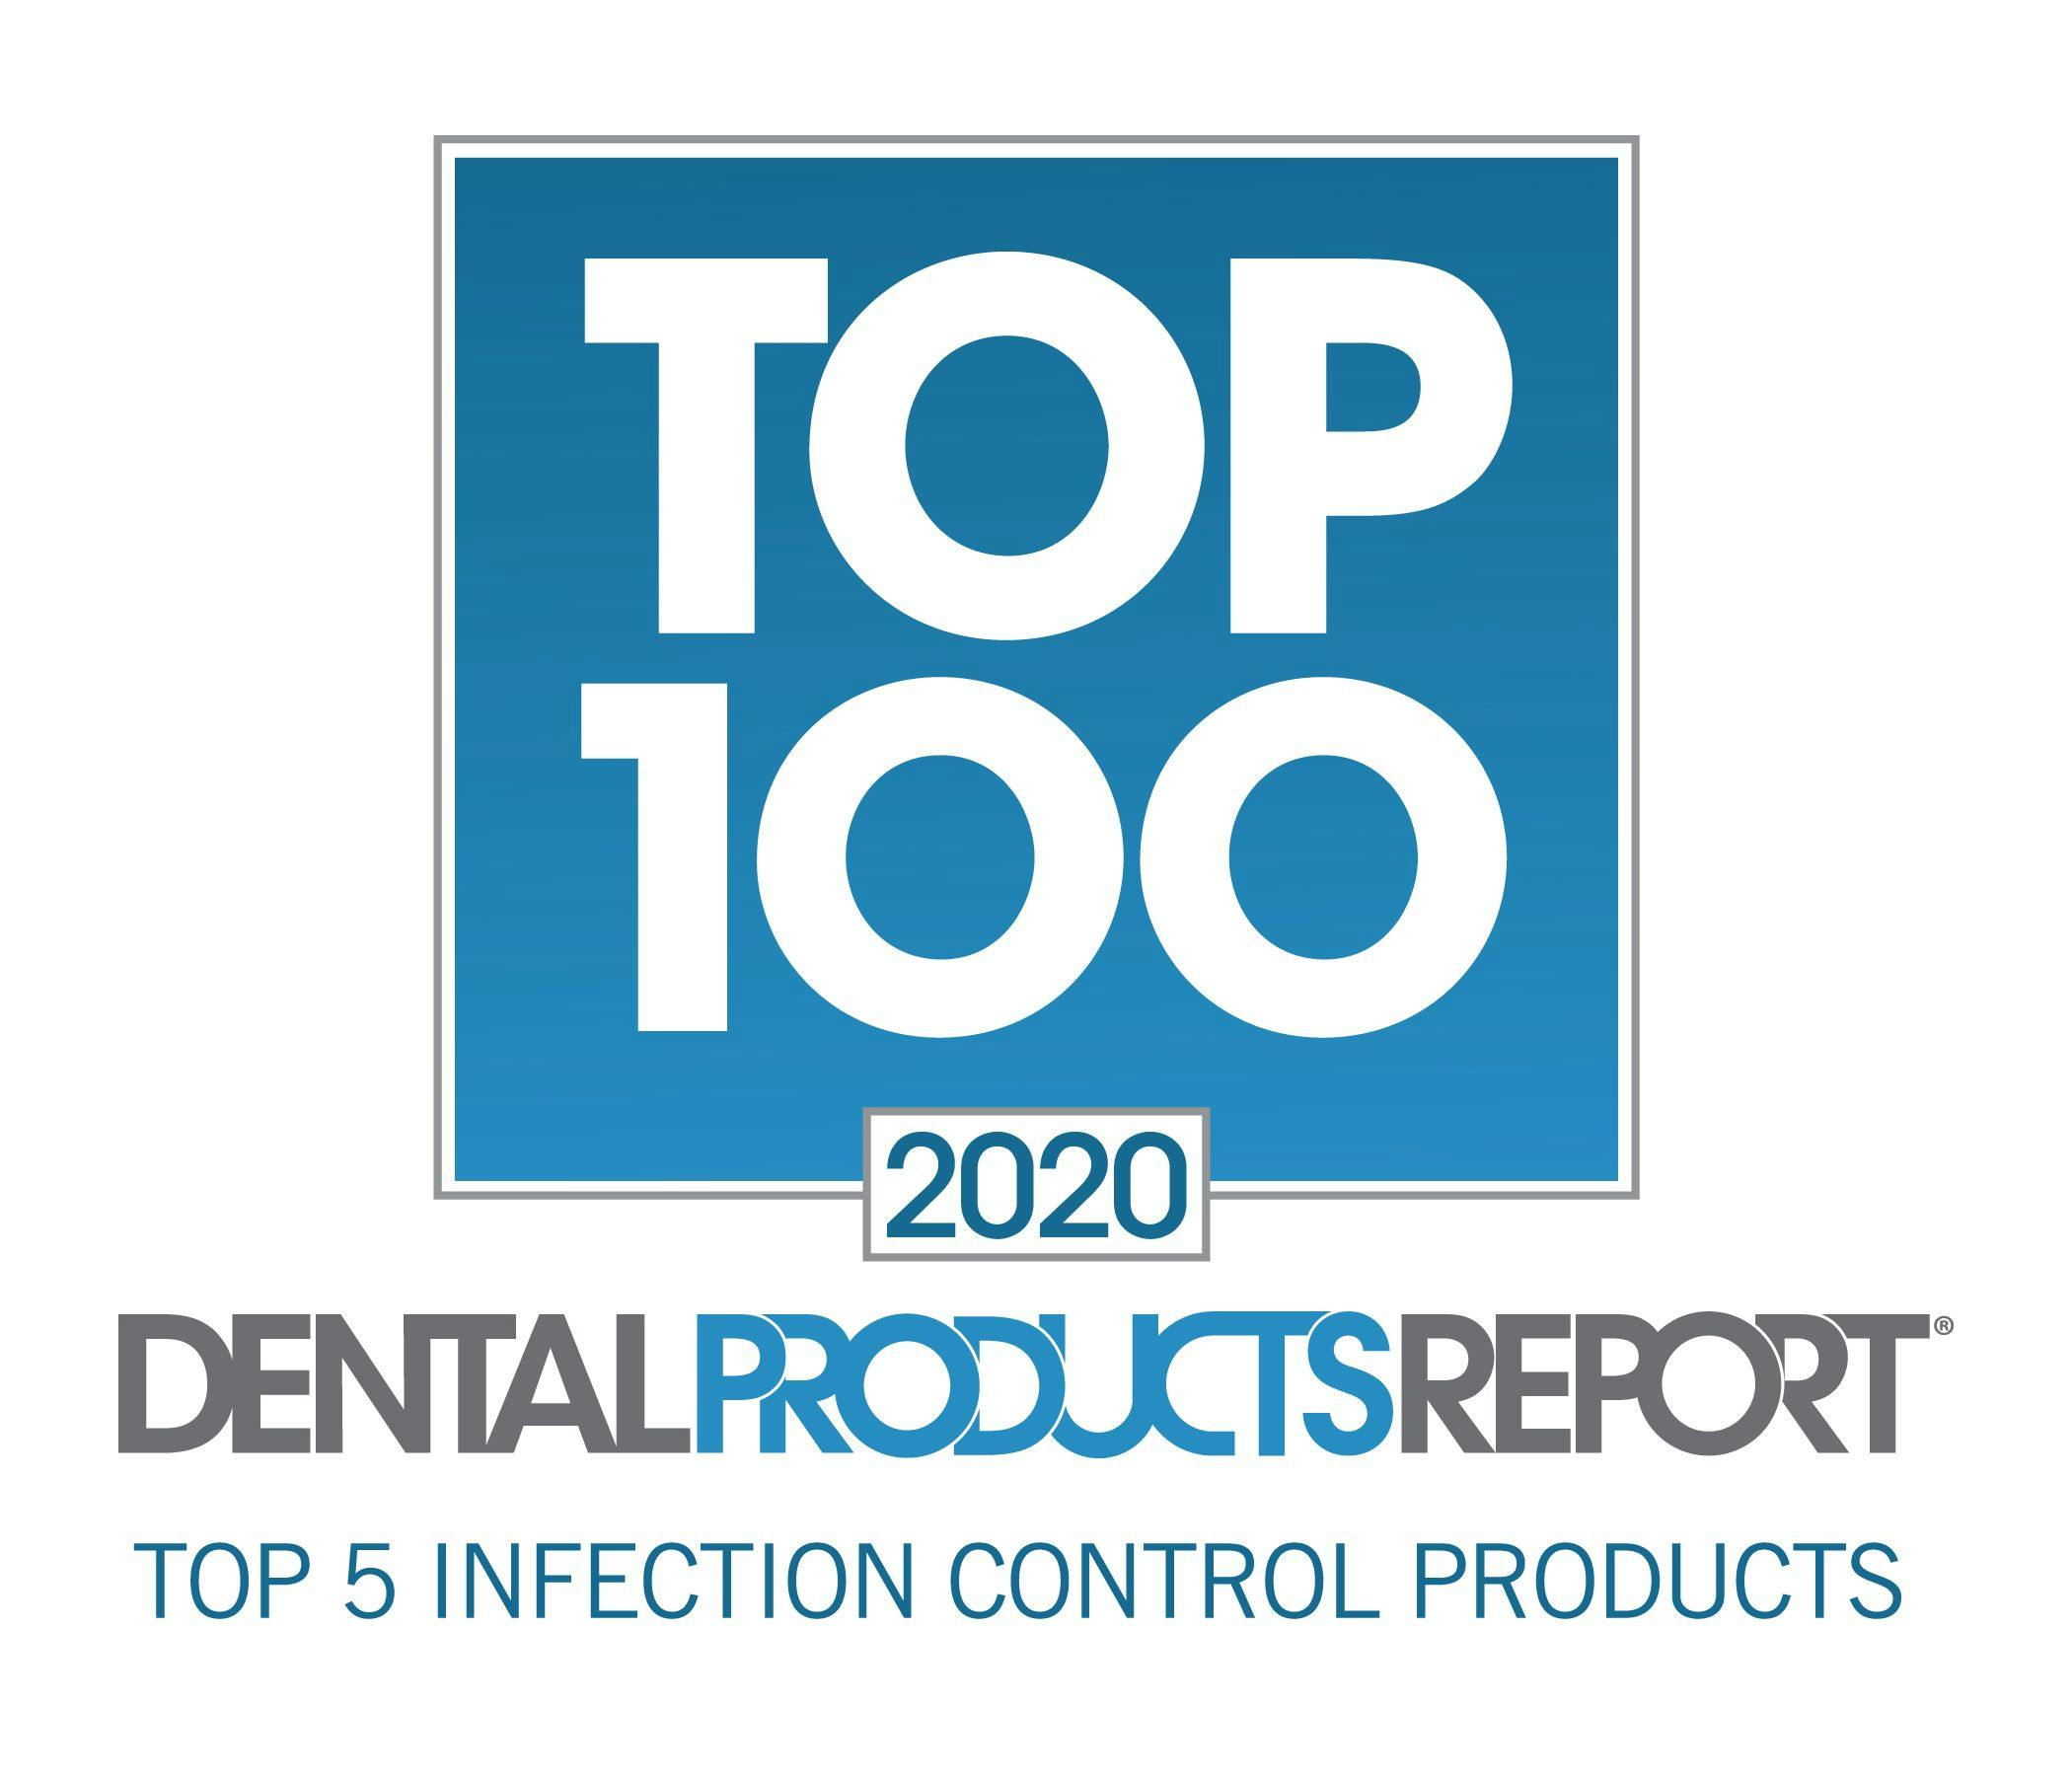 Top 5 Infection Control Products of 2020